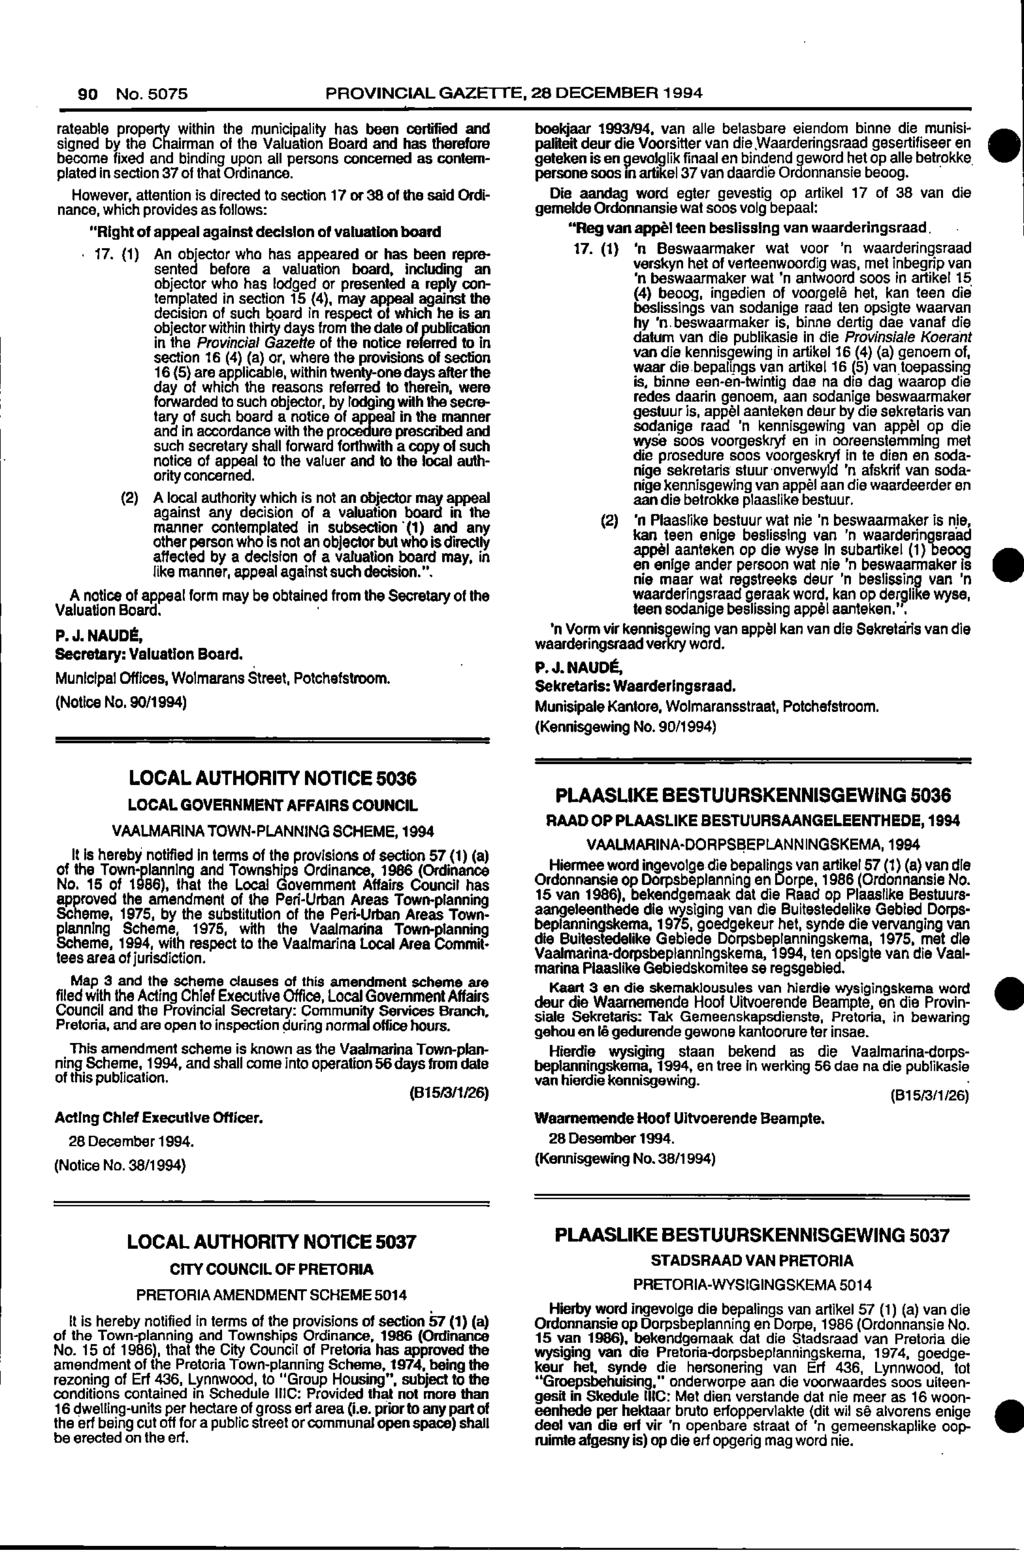 1 section, notice 90 No 5075 PROVINCIAL GAZETTE, 28 DECEMBER 1994 rateable property within the municipality has been certified and boekjaar 1993/94 van alle belasbare eiendom binne die munisisigned